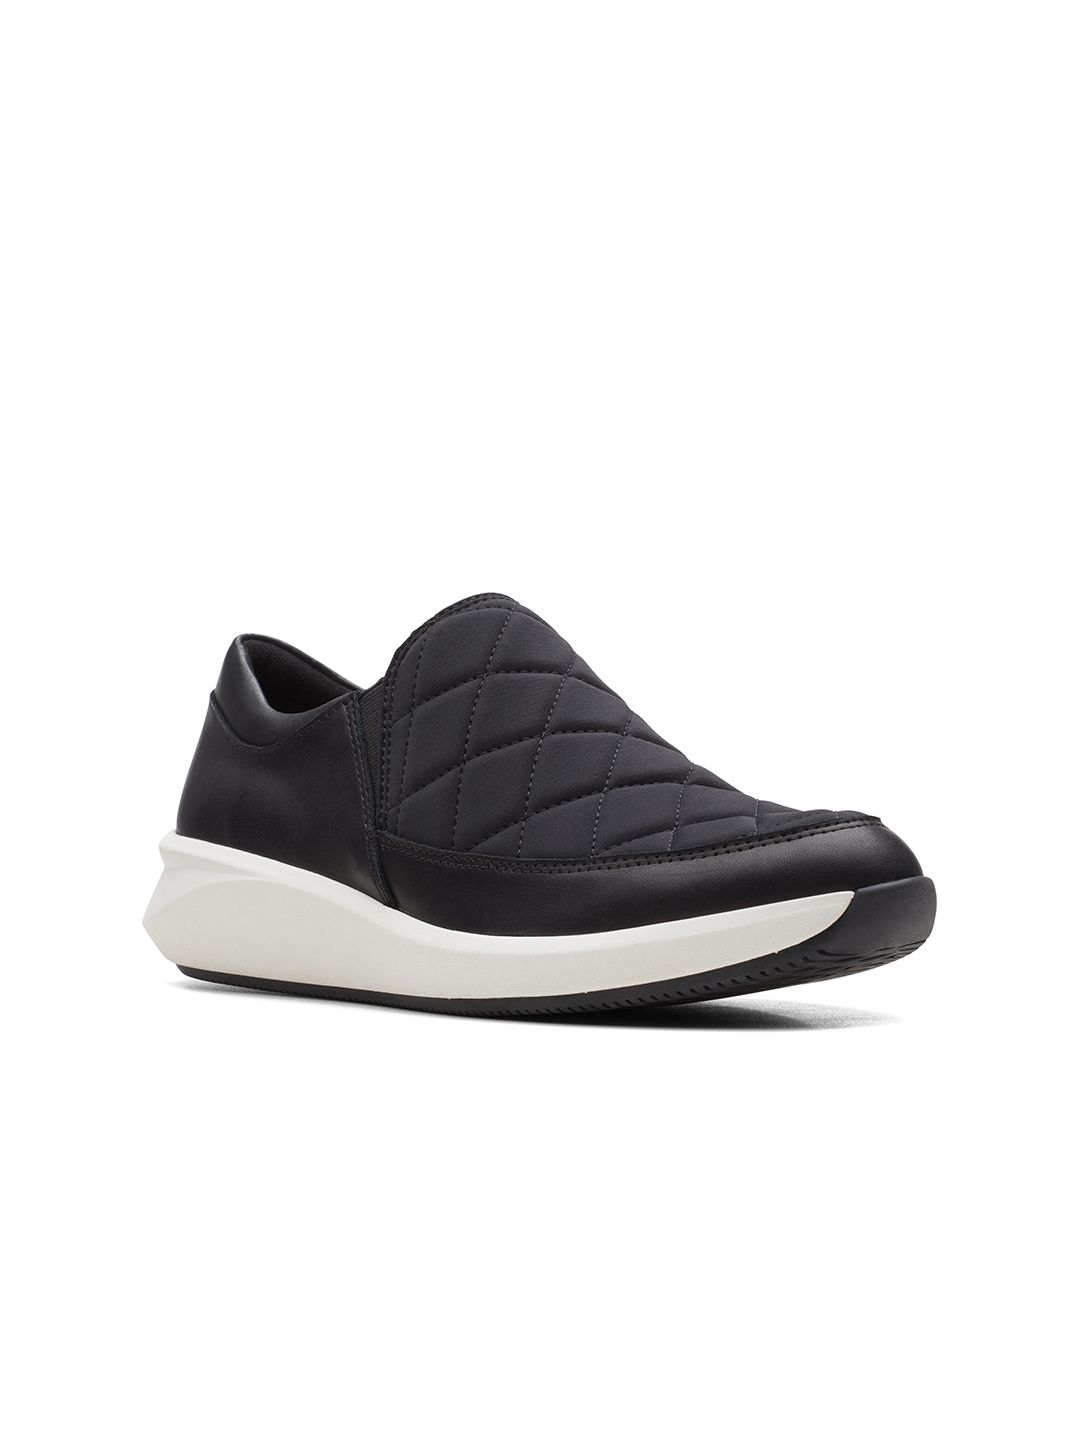 Clarks Women Black Leather Slip-On Sneakers Price in India